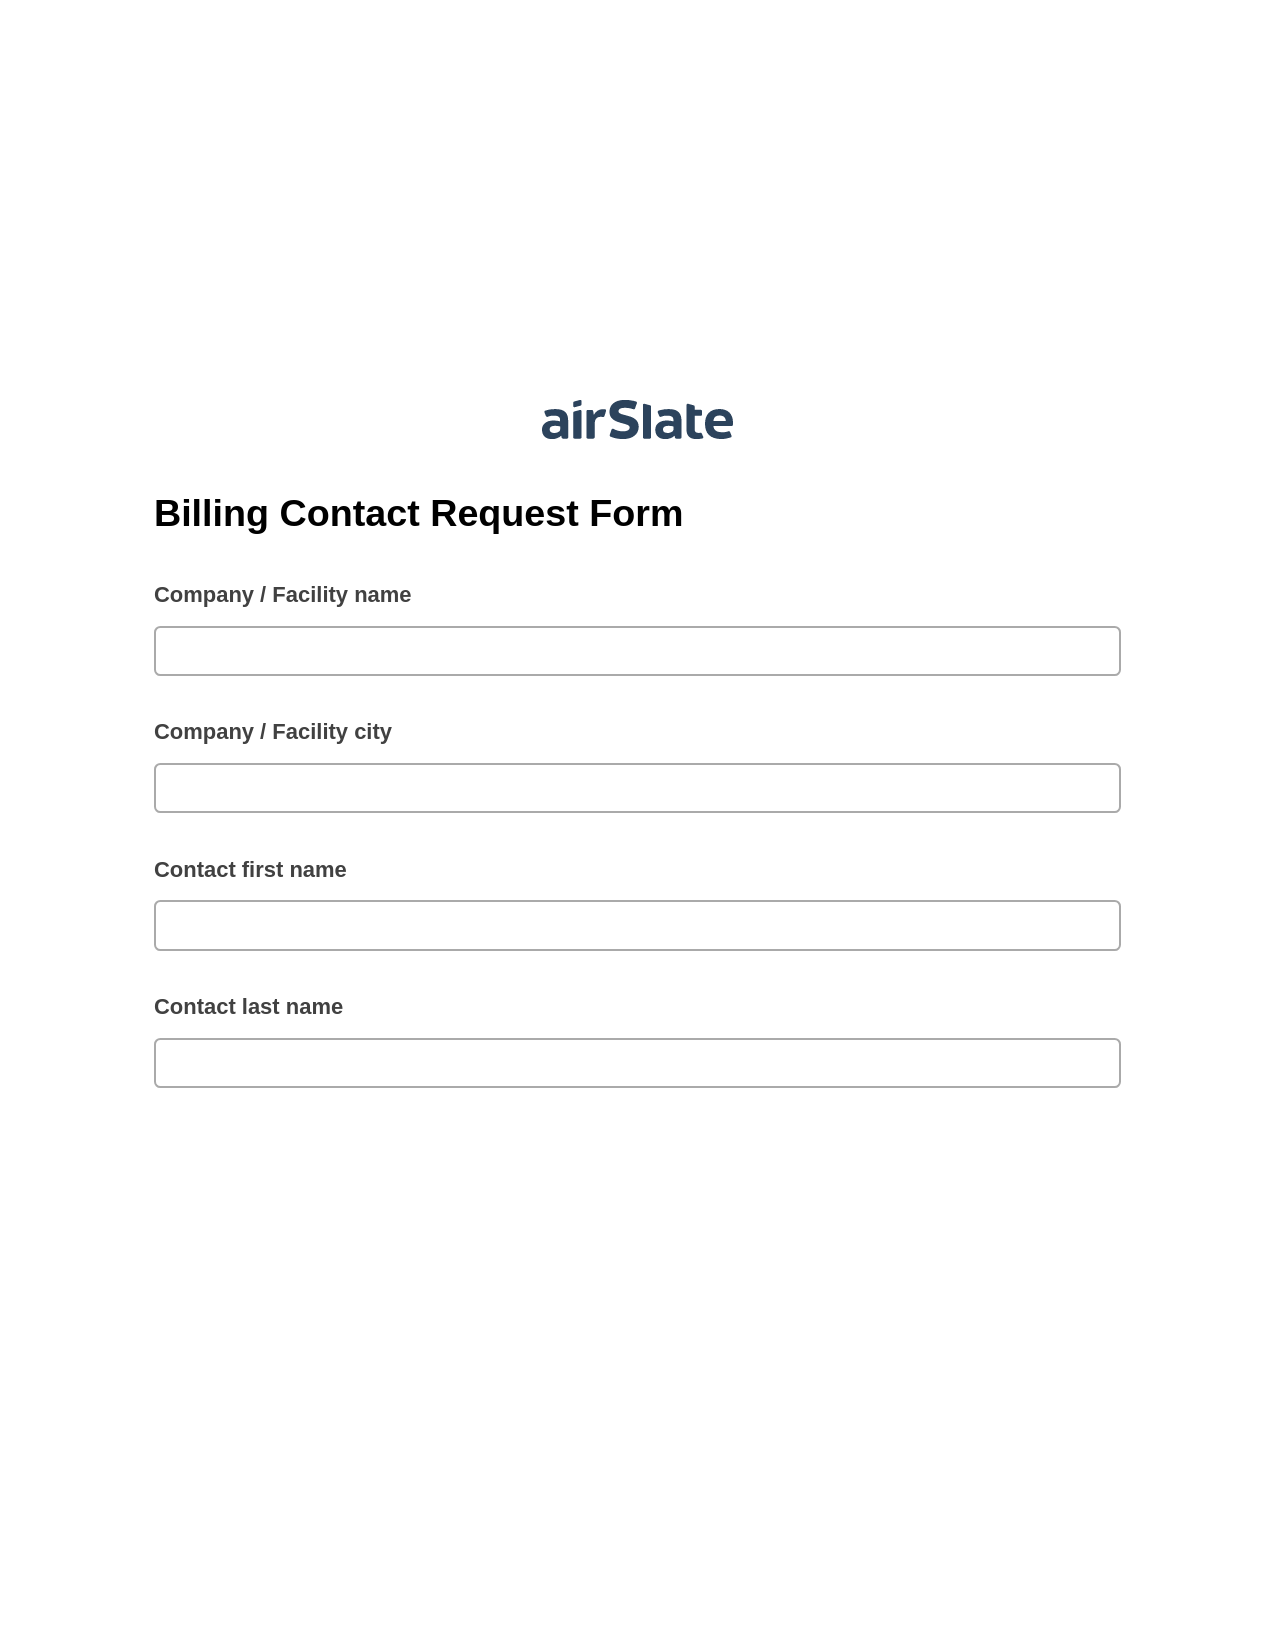 Multirole Billing Contact Request Form Pre-fill from Google Sheets Bot, Hide Signatures Bot, Export to Smartsheet